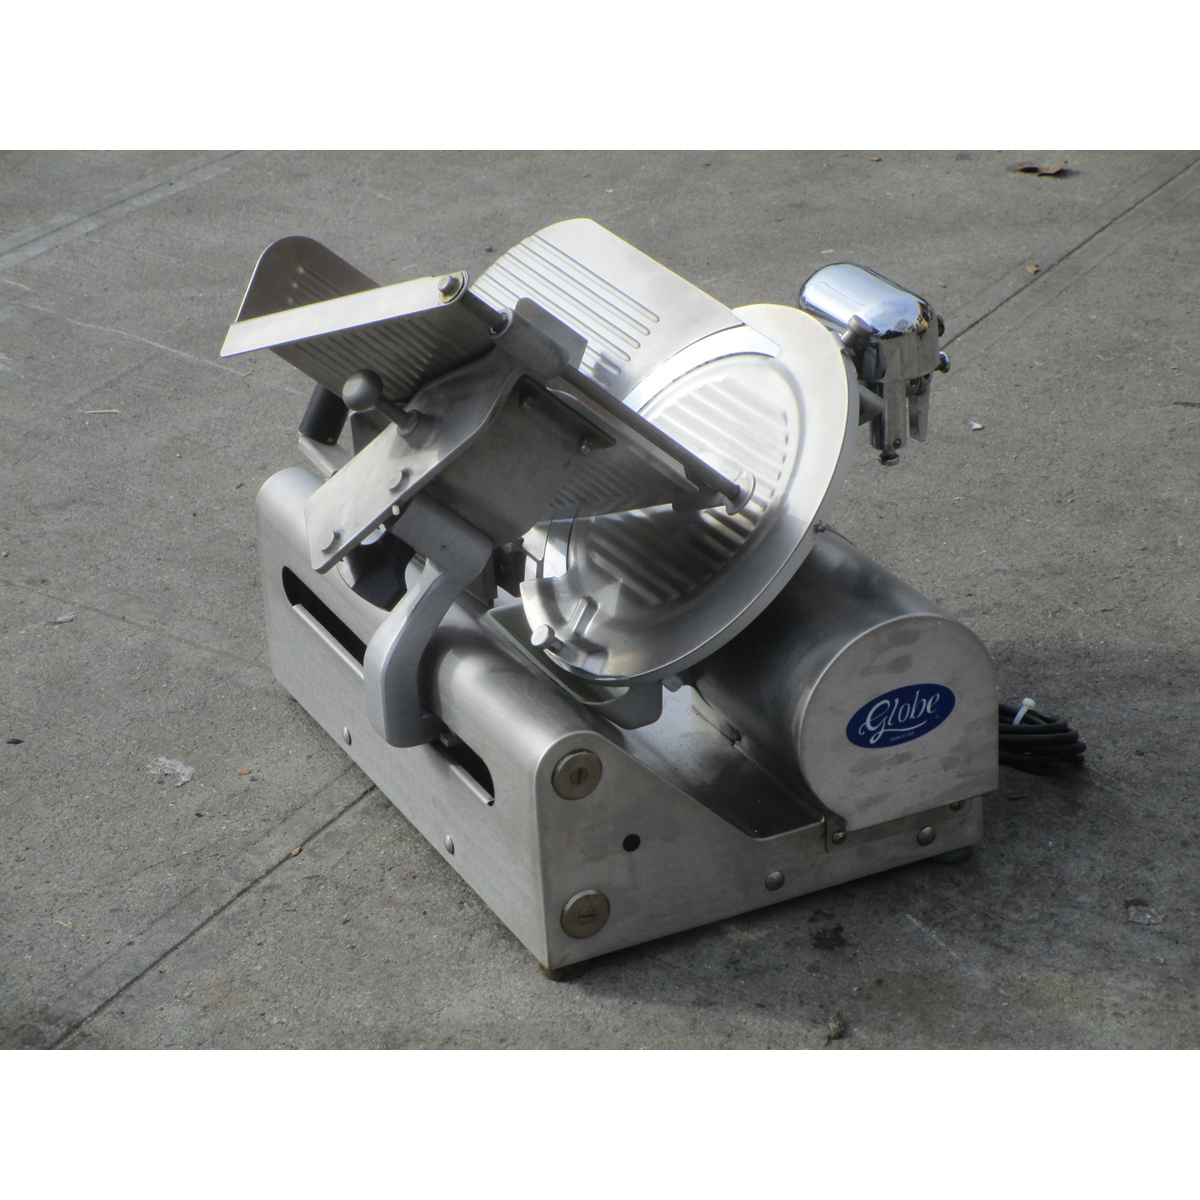 Globe 3500 Meat Slicer, Used Very Good Condition image 2